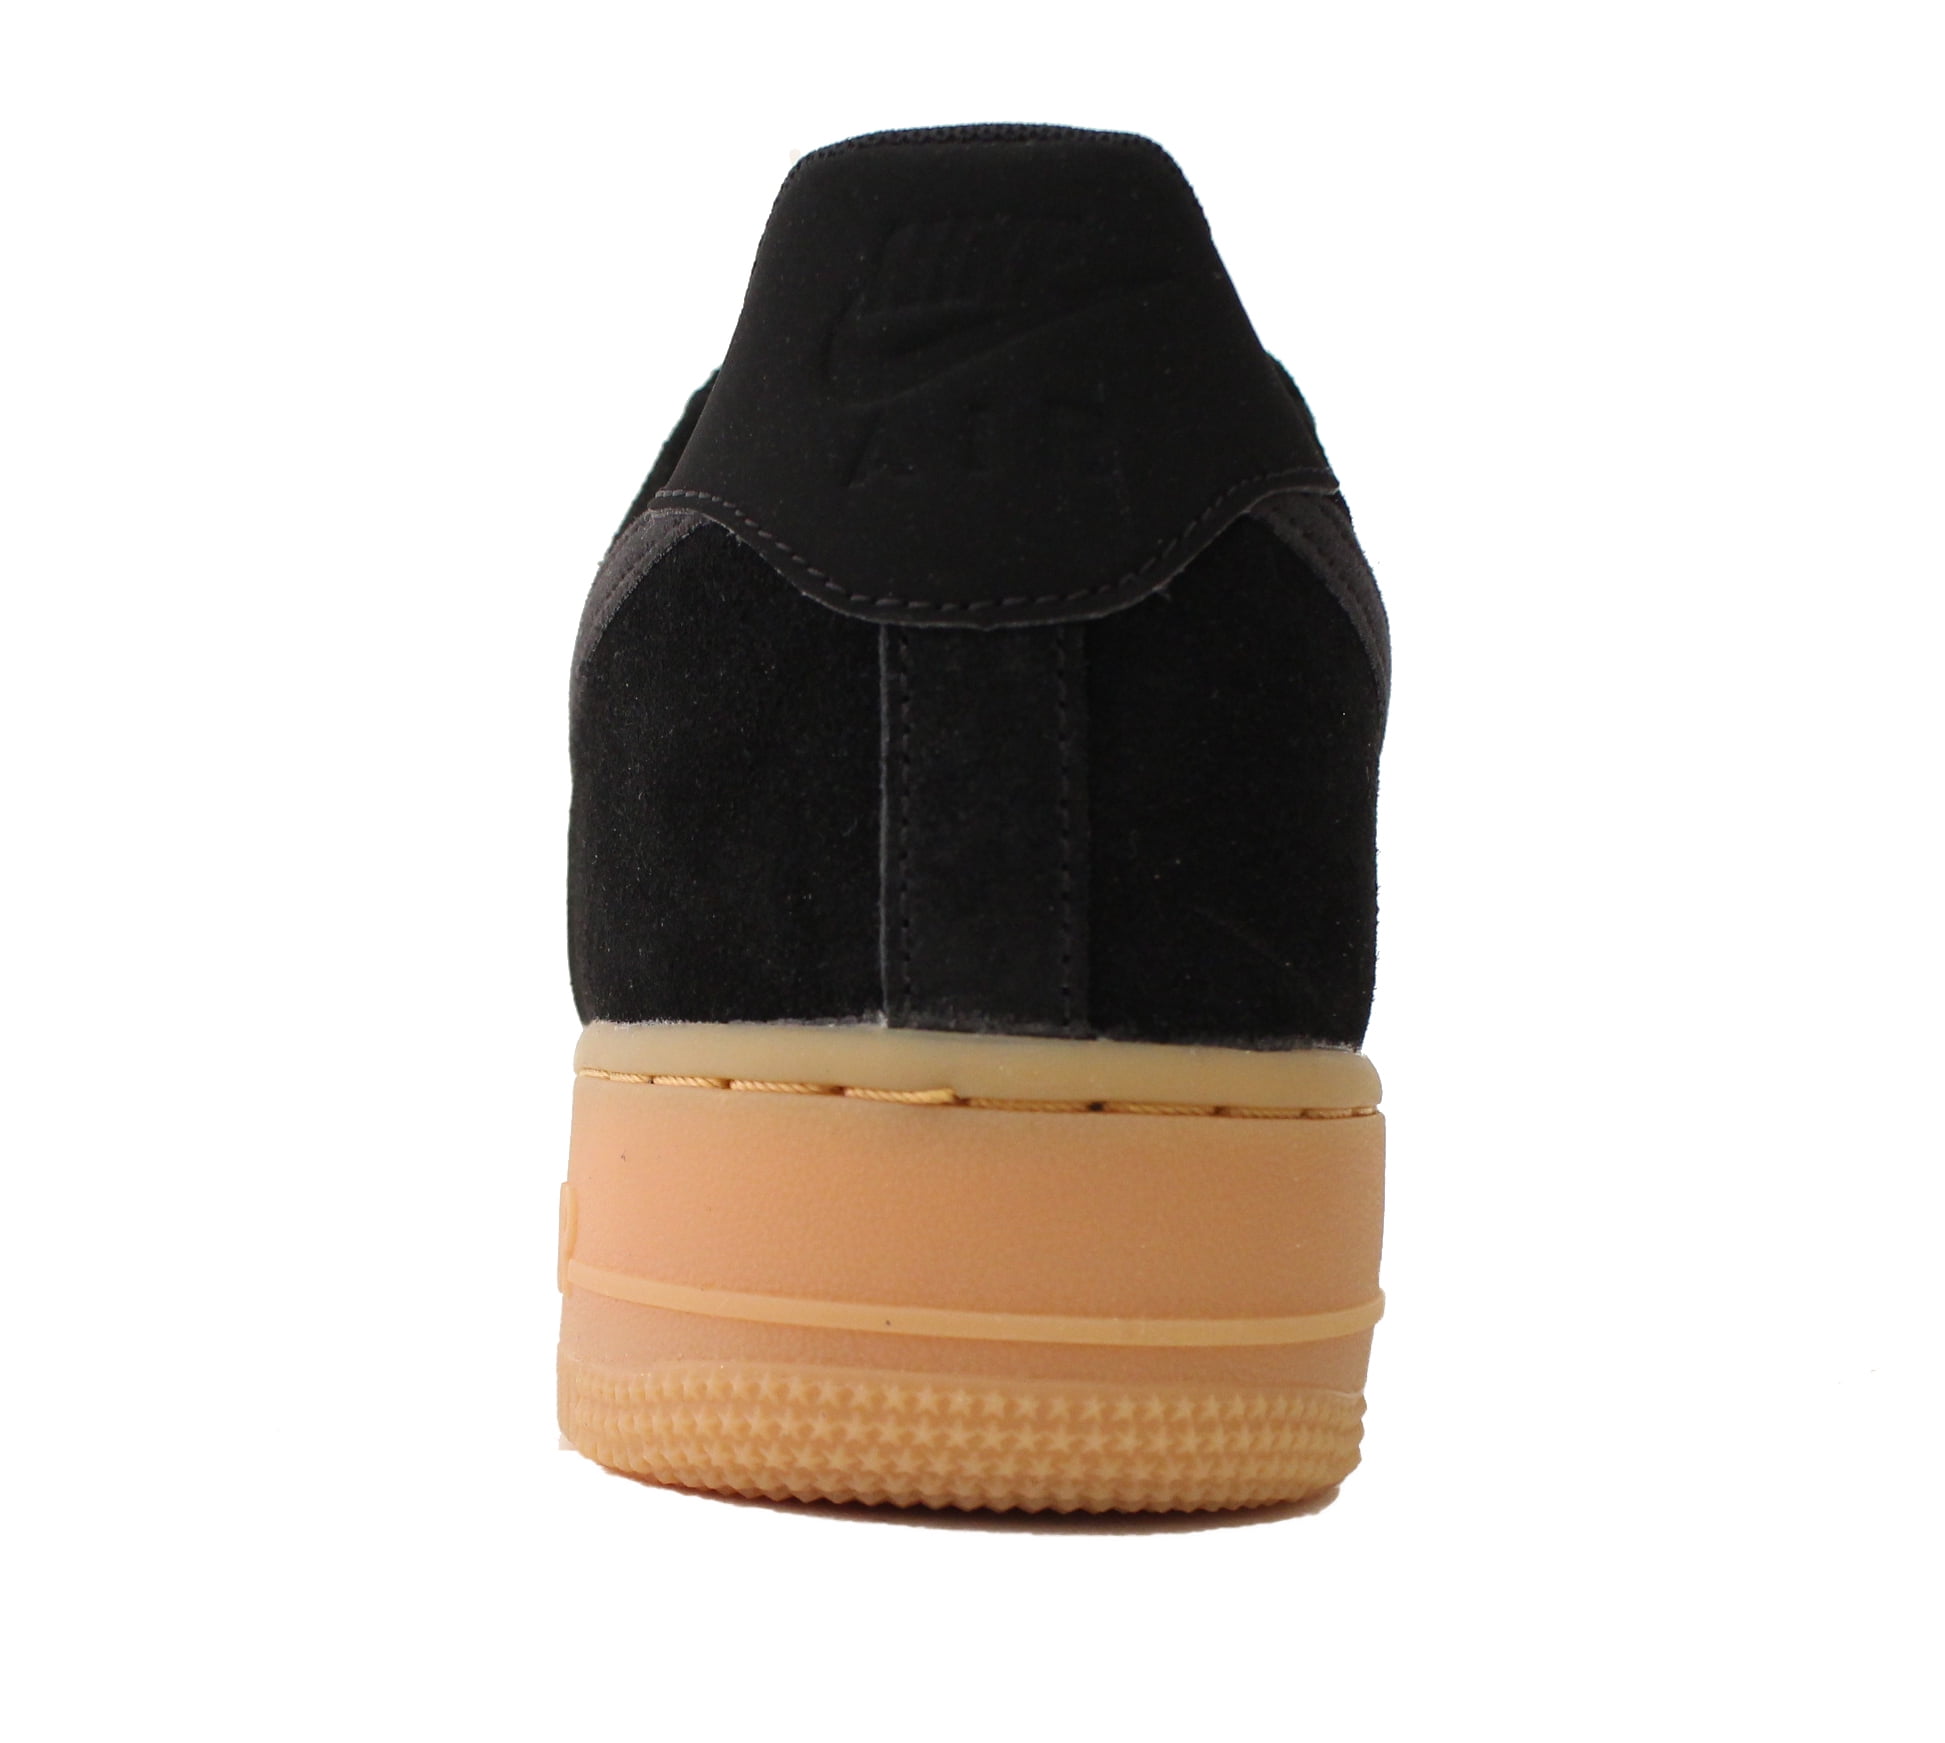 Air Force 1 High 07 LV8 Suede 'Black Gum' for Sale in Chicago, IL